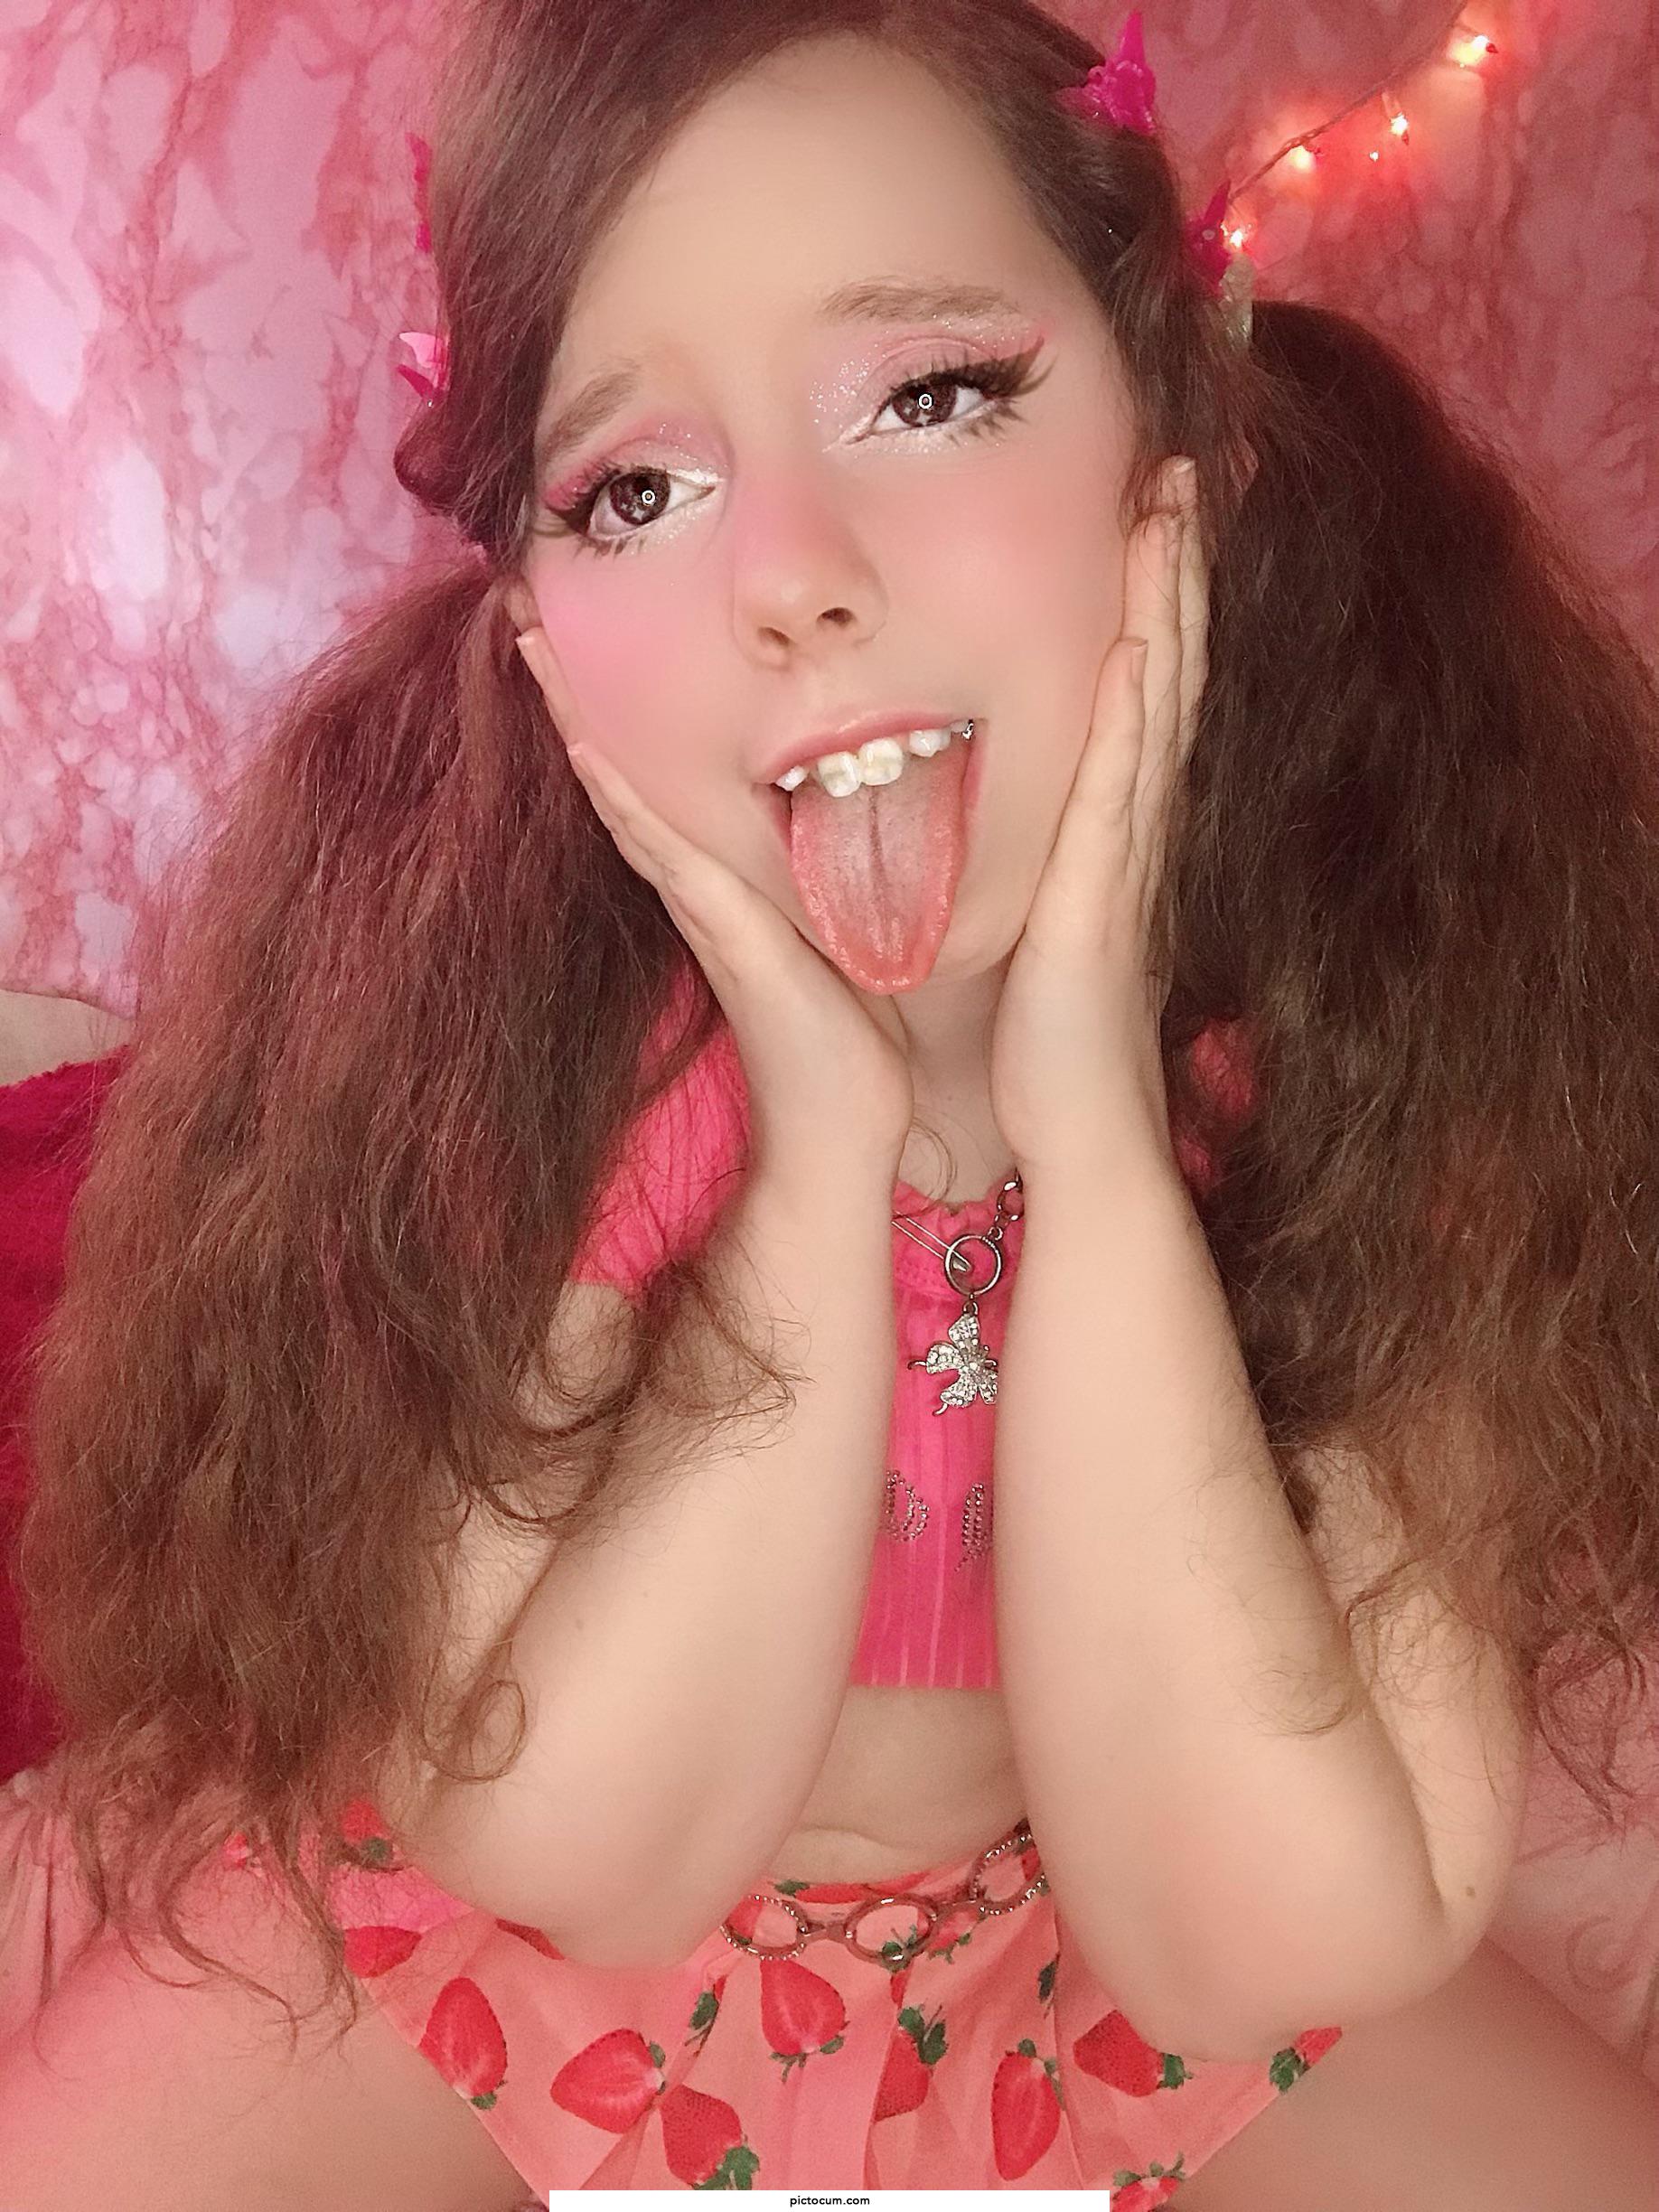 My mouth is open &amp; ready 4 ur cum!✧*̥₊˚💞👅